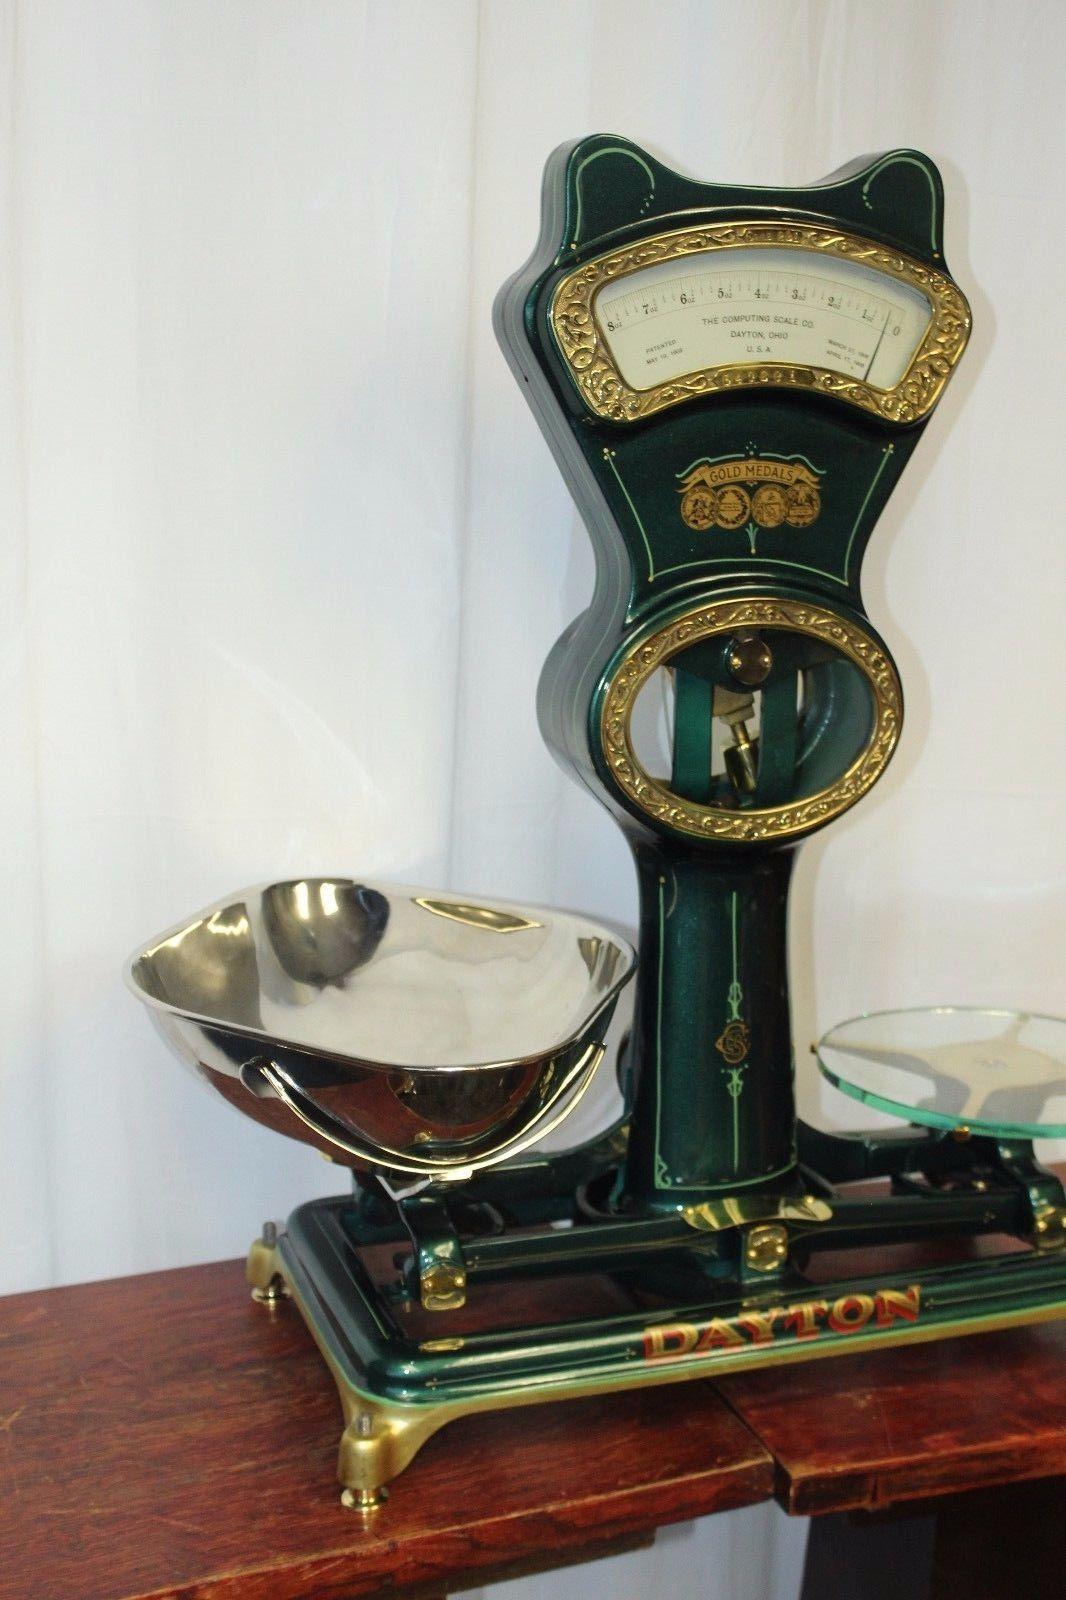 Weight measurements and scales have followed a very similar path. Some of the earliest examples of weight measurement were a simple rod that was suspended by a string in the middle. A pan was attached to each end and the product that needed to be